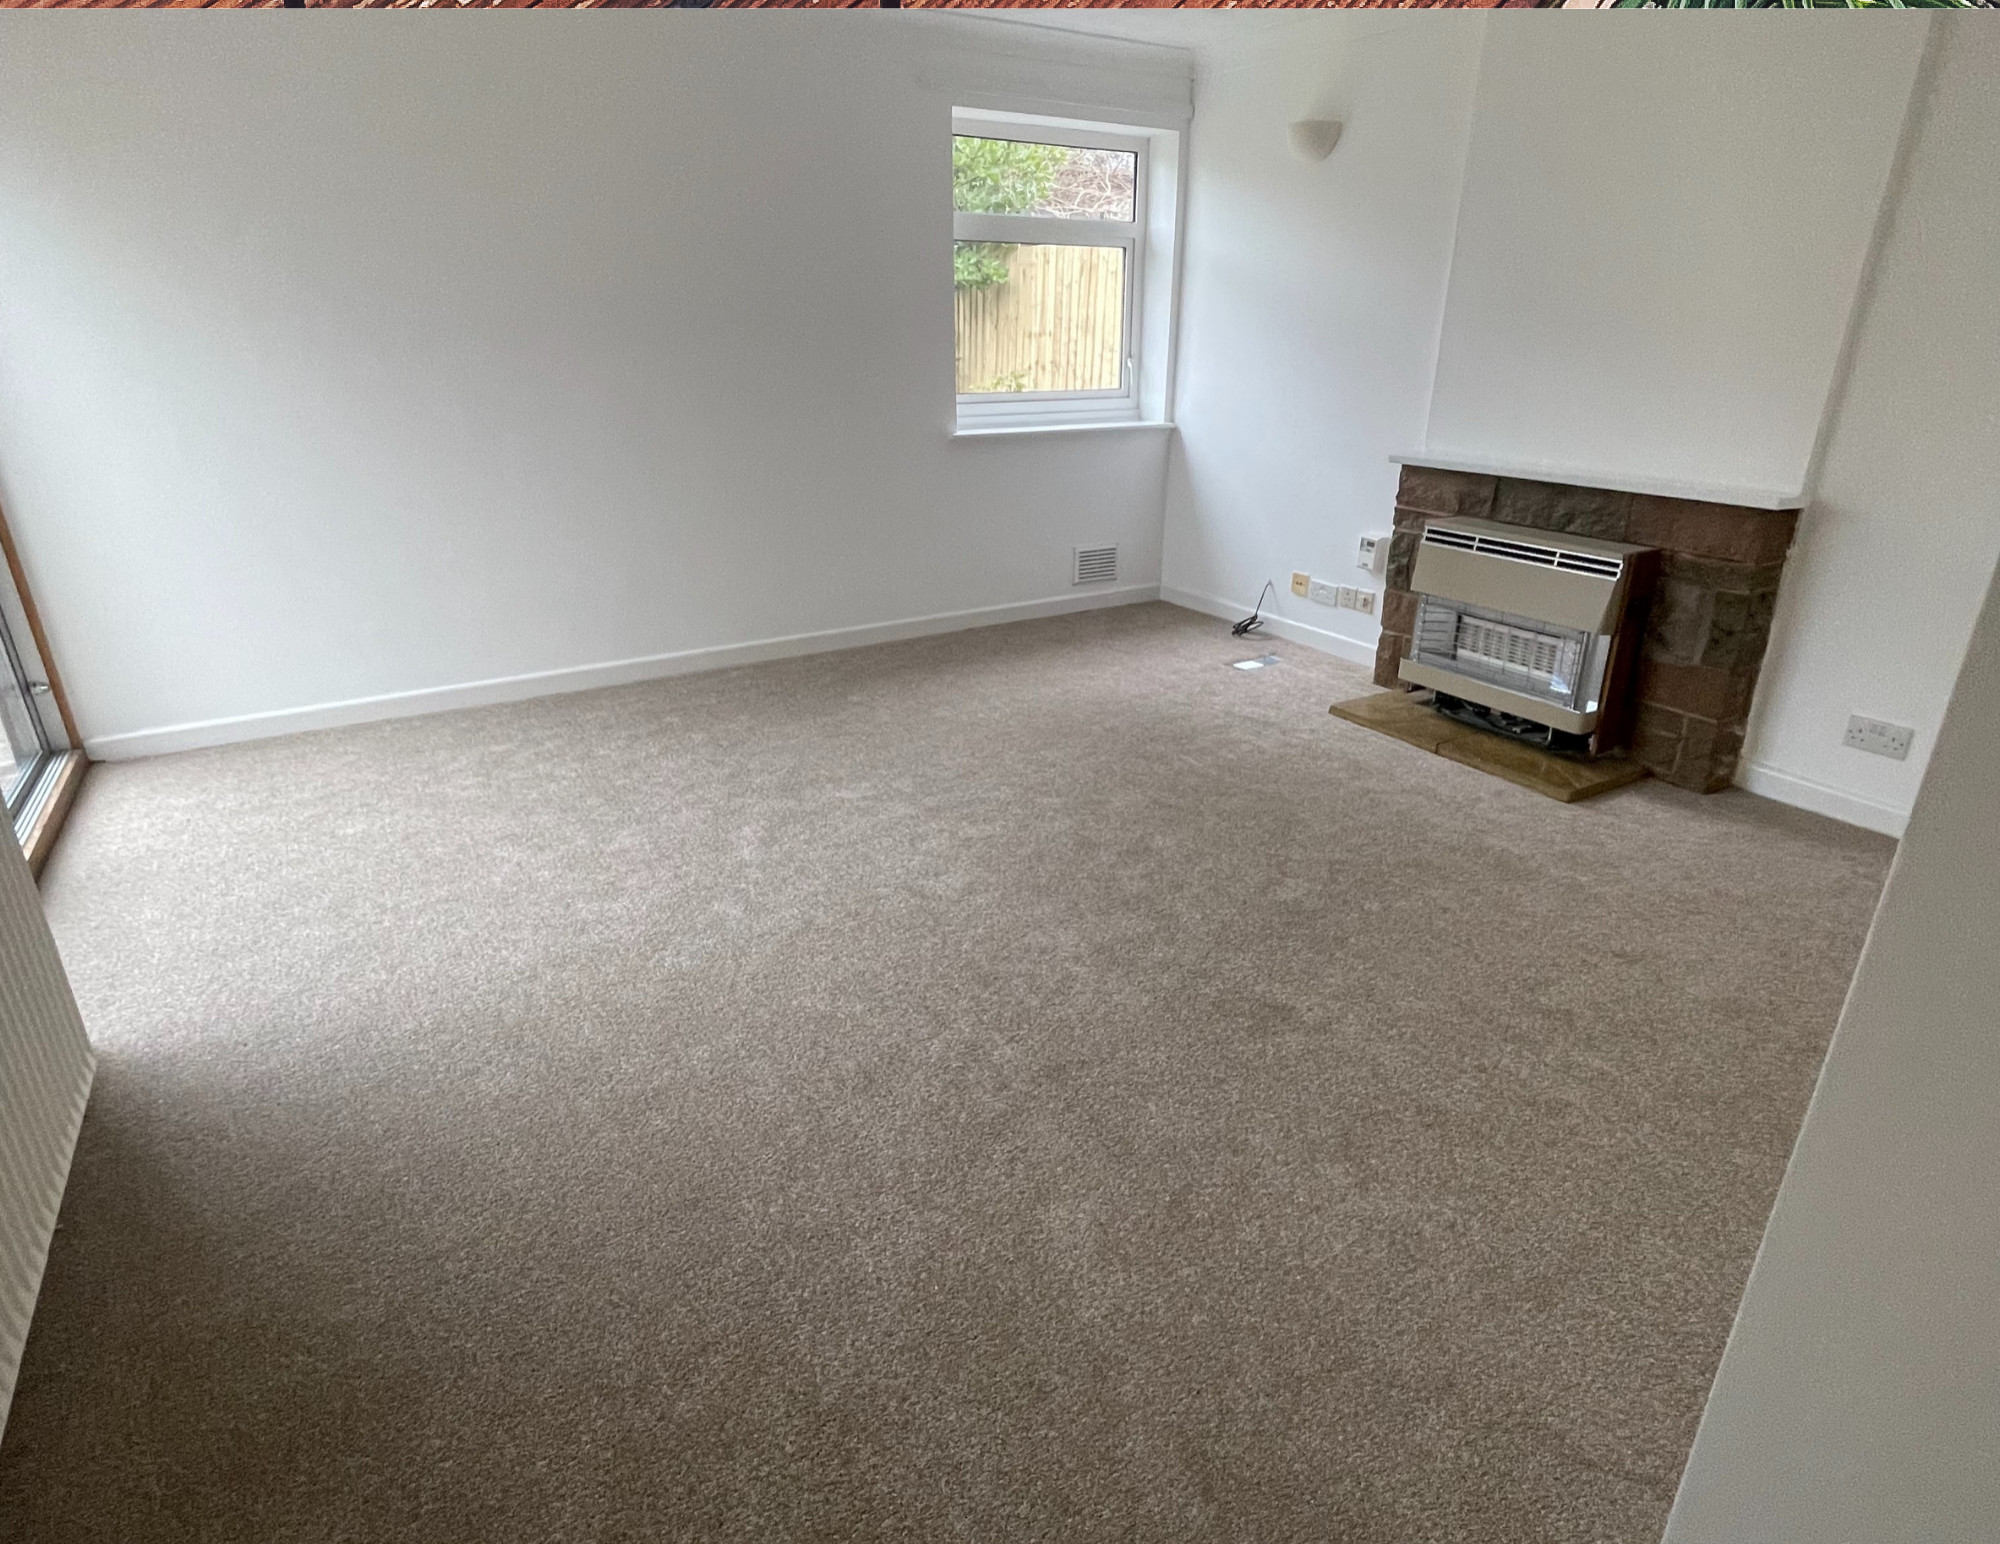 Before Image - Living Space - 2 bedroom bungalow, Coventry - Staged to Sell